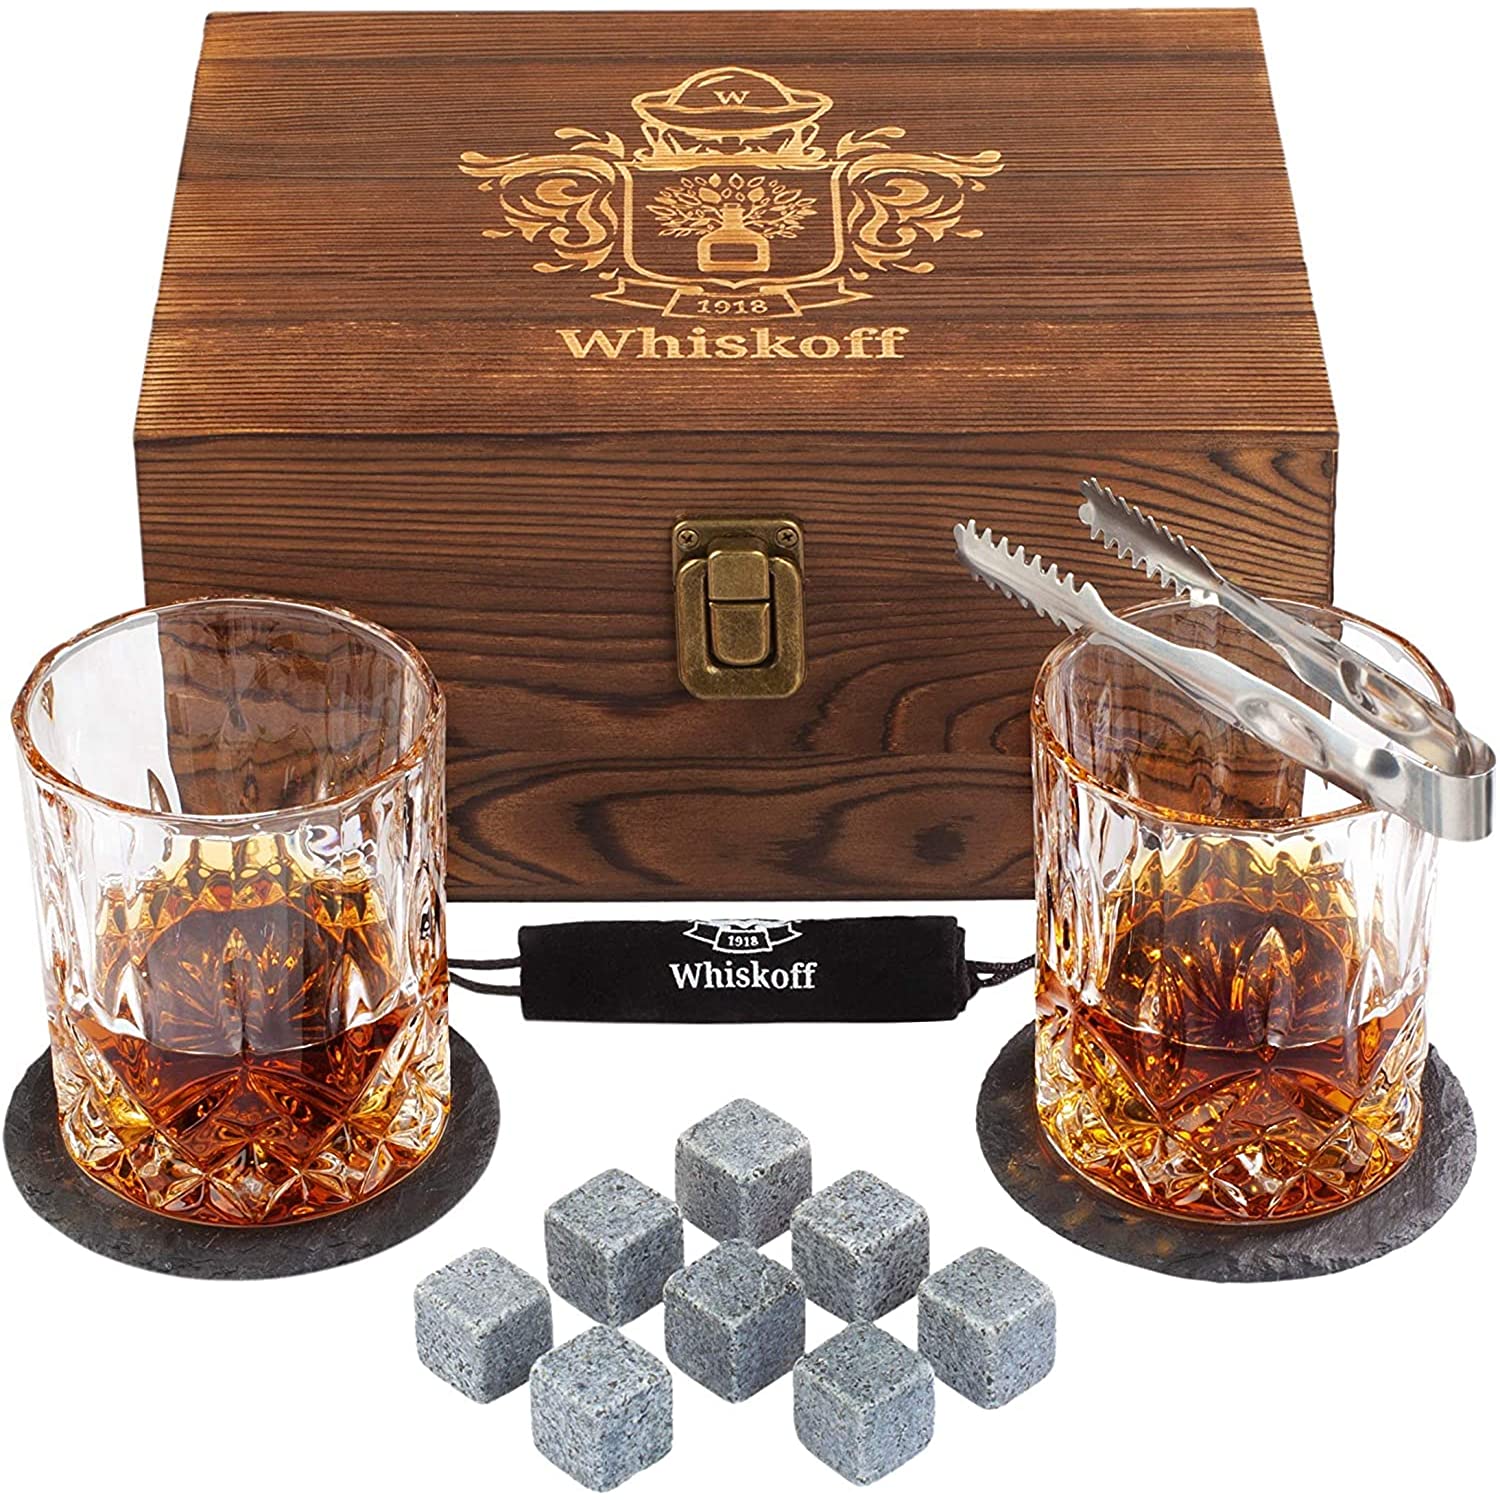 Leebs Whiskey Set - Whiskey Gifts for Men - Whiskey Glasses Set of 2, 2 Large Sphere Ice Molds, 2 Slate Coasters, Gift Box - Bourbon Gifts for Men